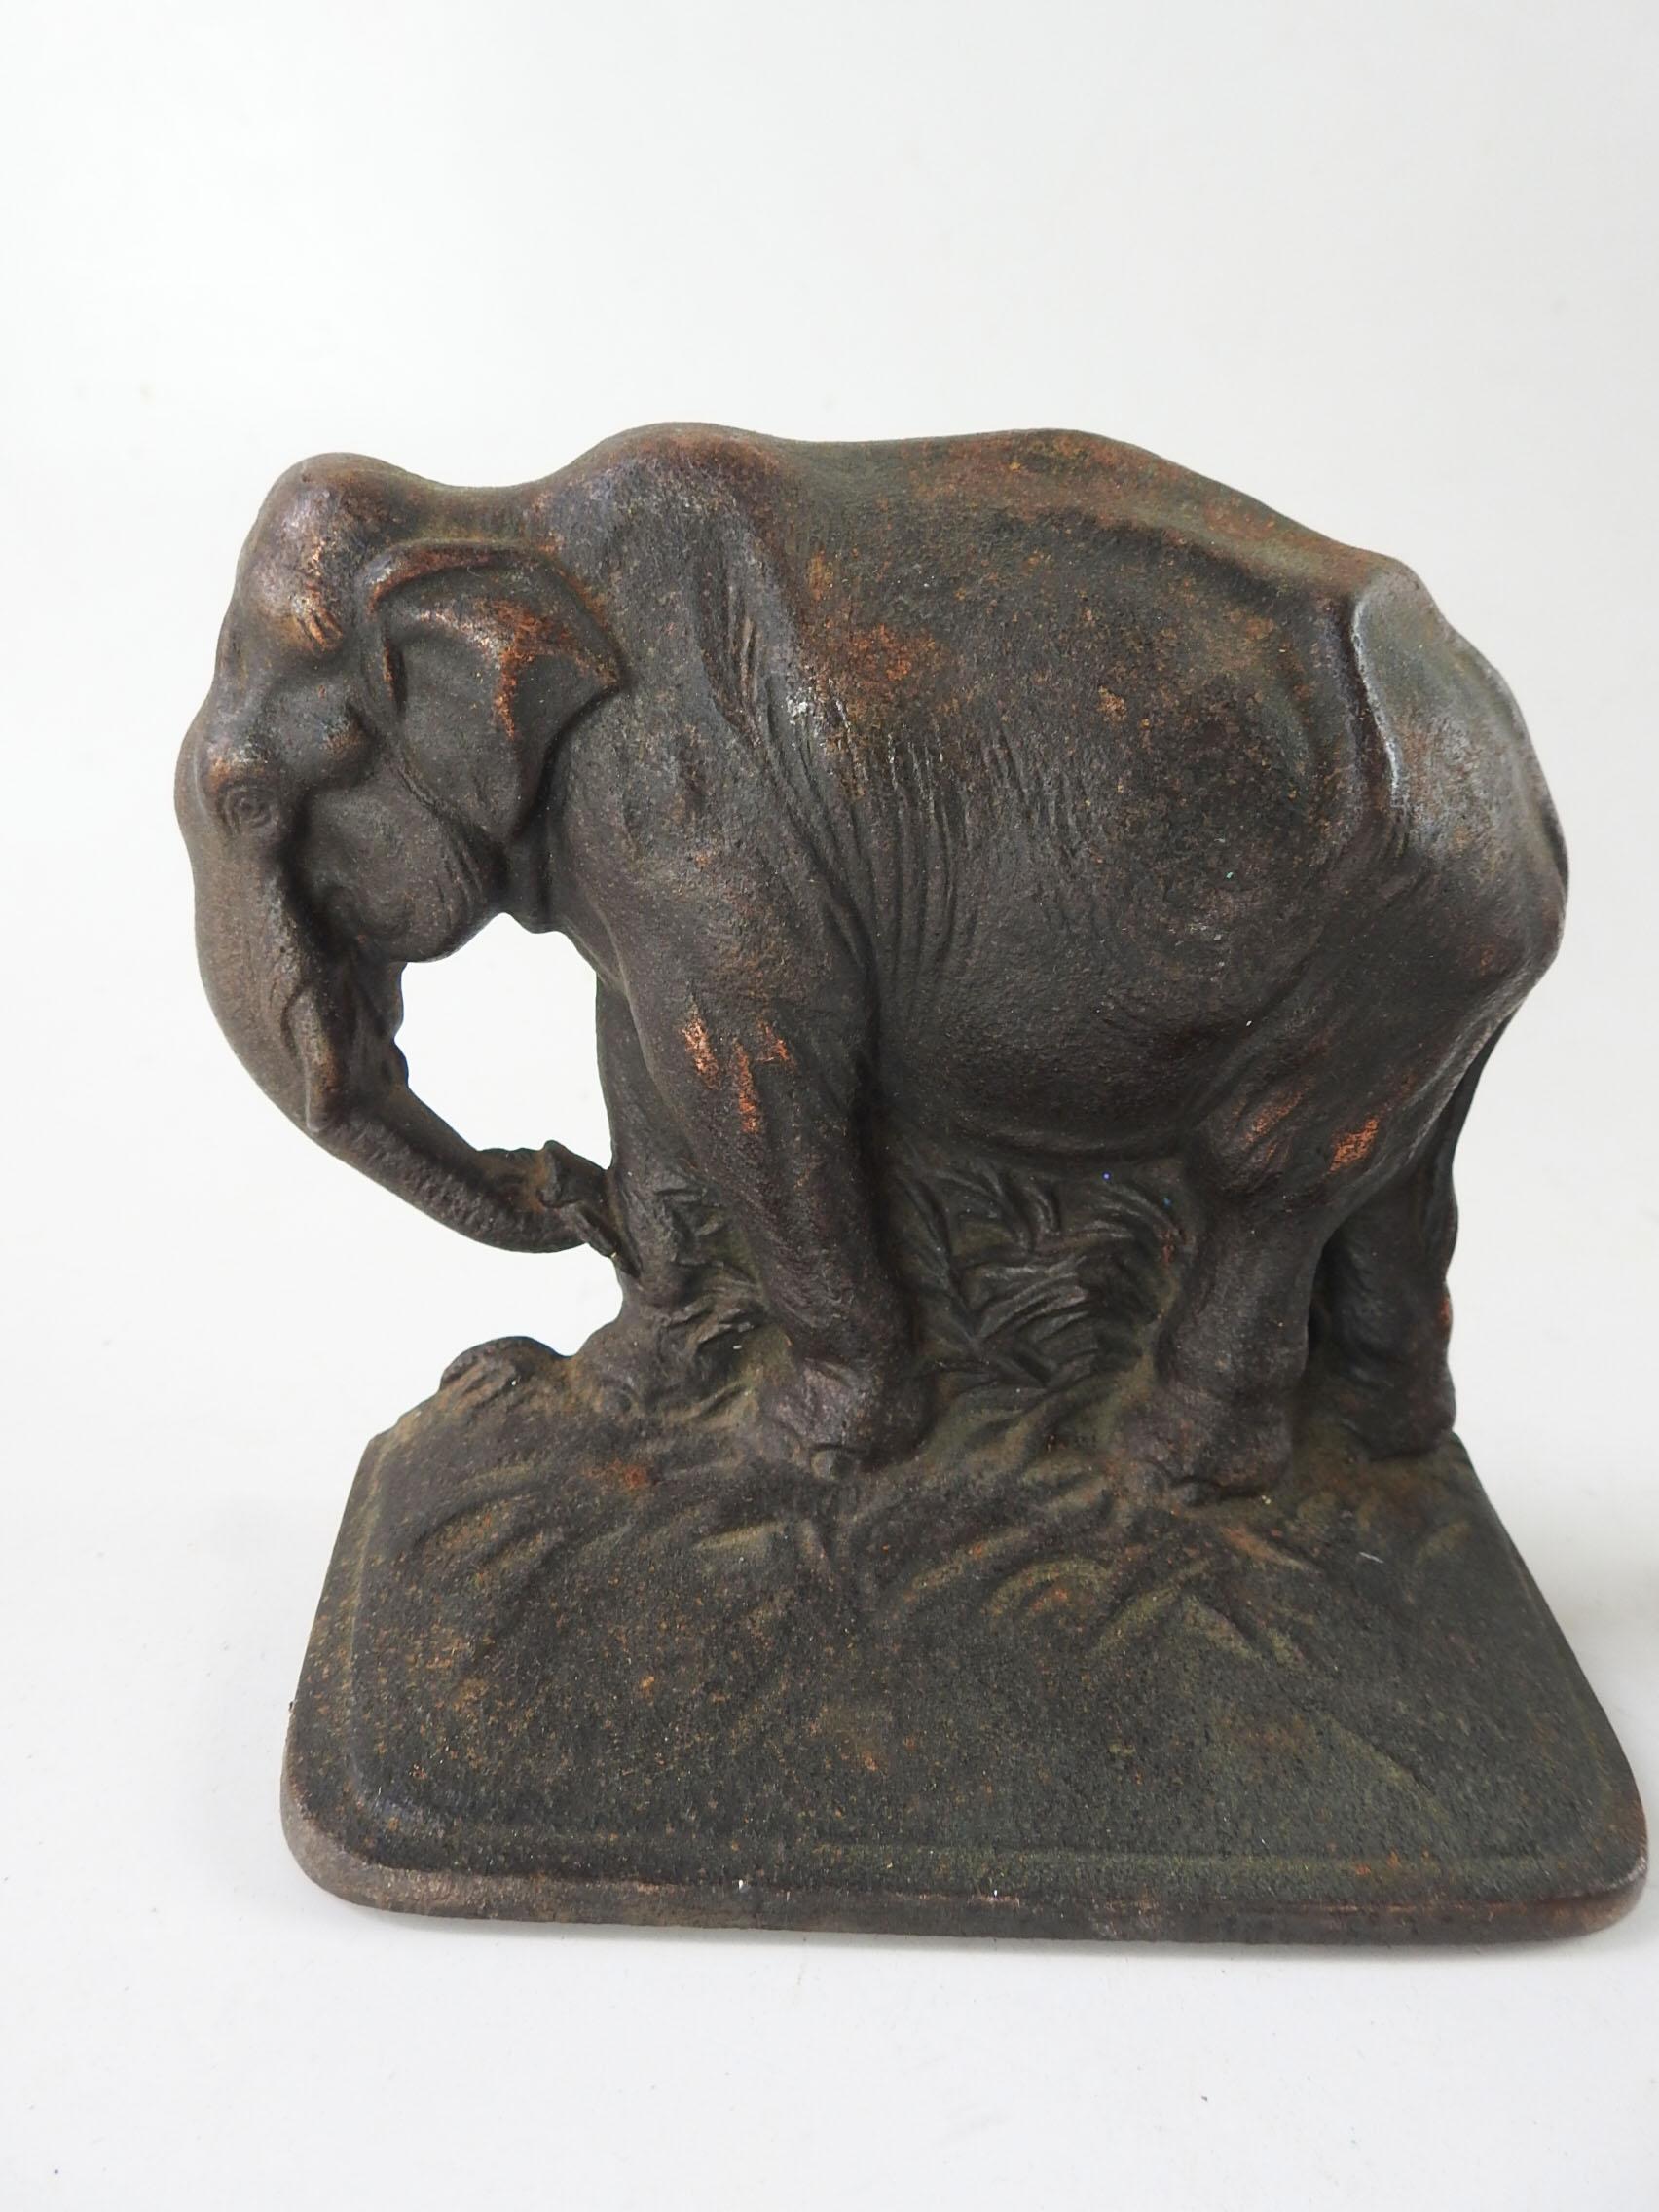 Vintage cast iron elephant bookends. Unmarked, little bit of original copper finish remains, wear to finish, scuffing, felt bottoms missing.